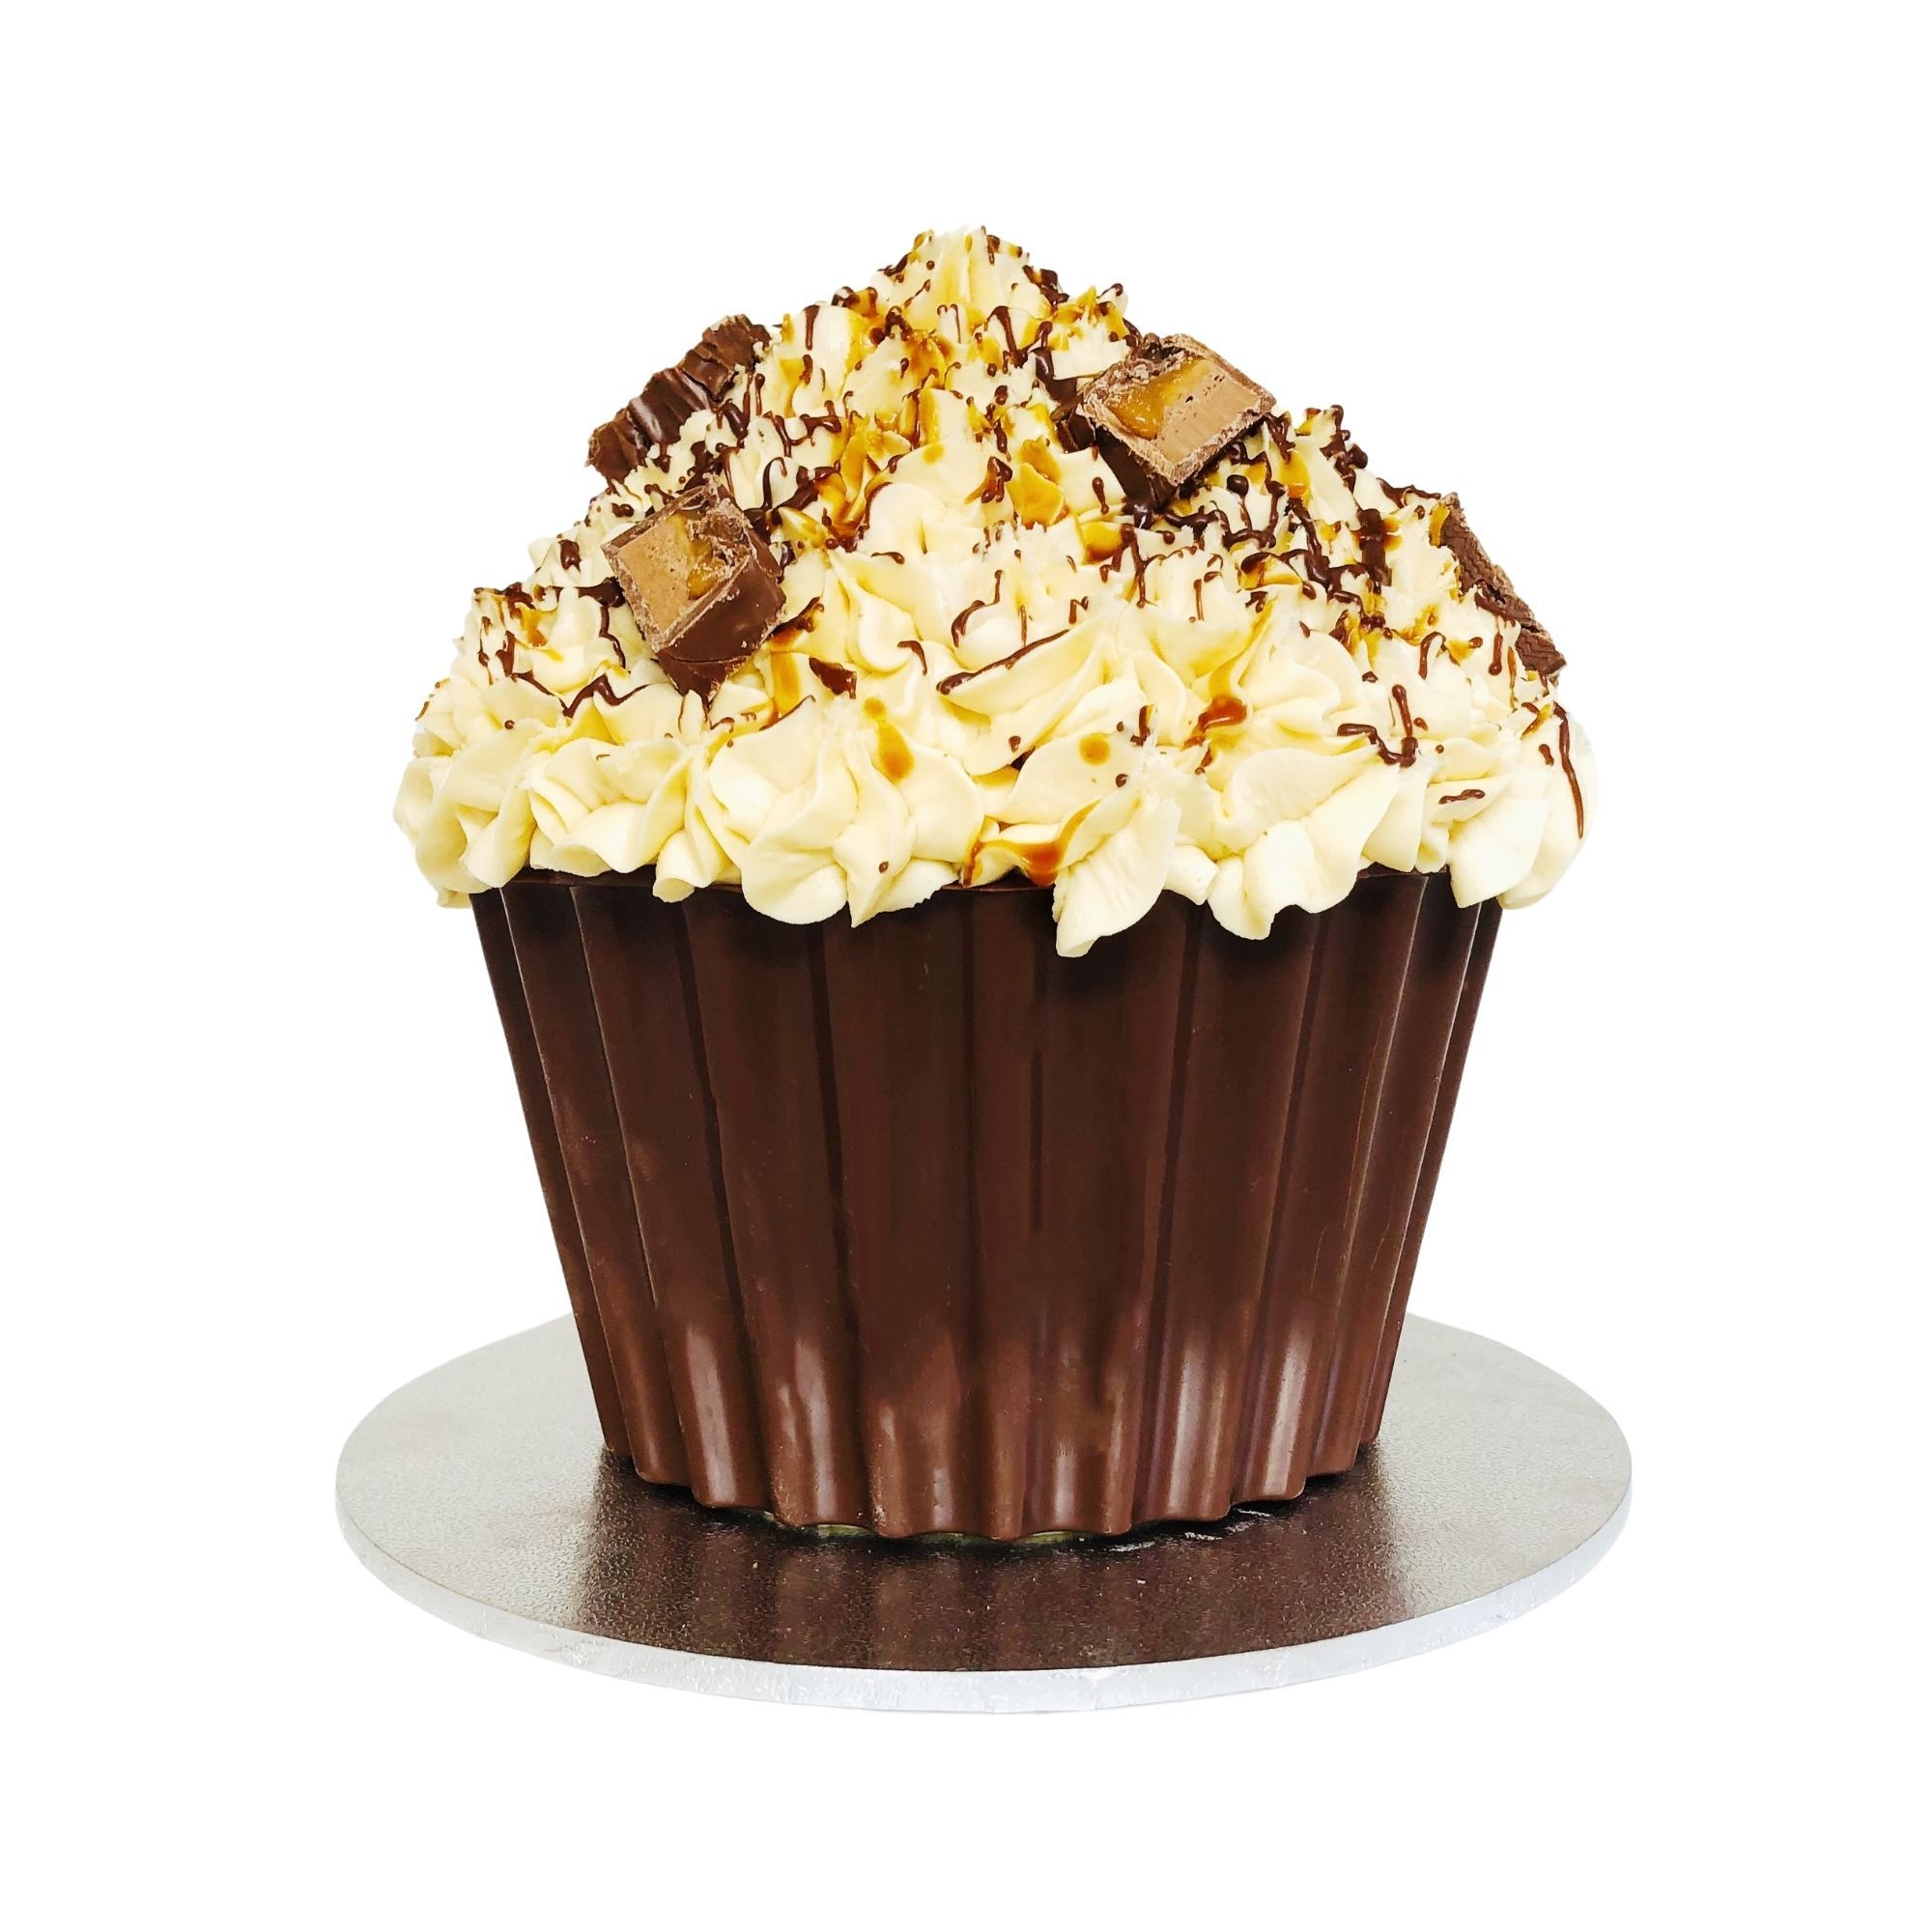 Choc Caramel Giant Cupcake Special Occasion The Cupcake Queens 